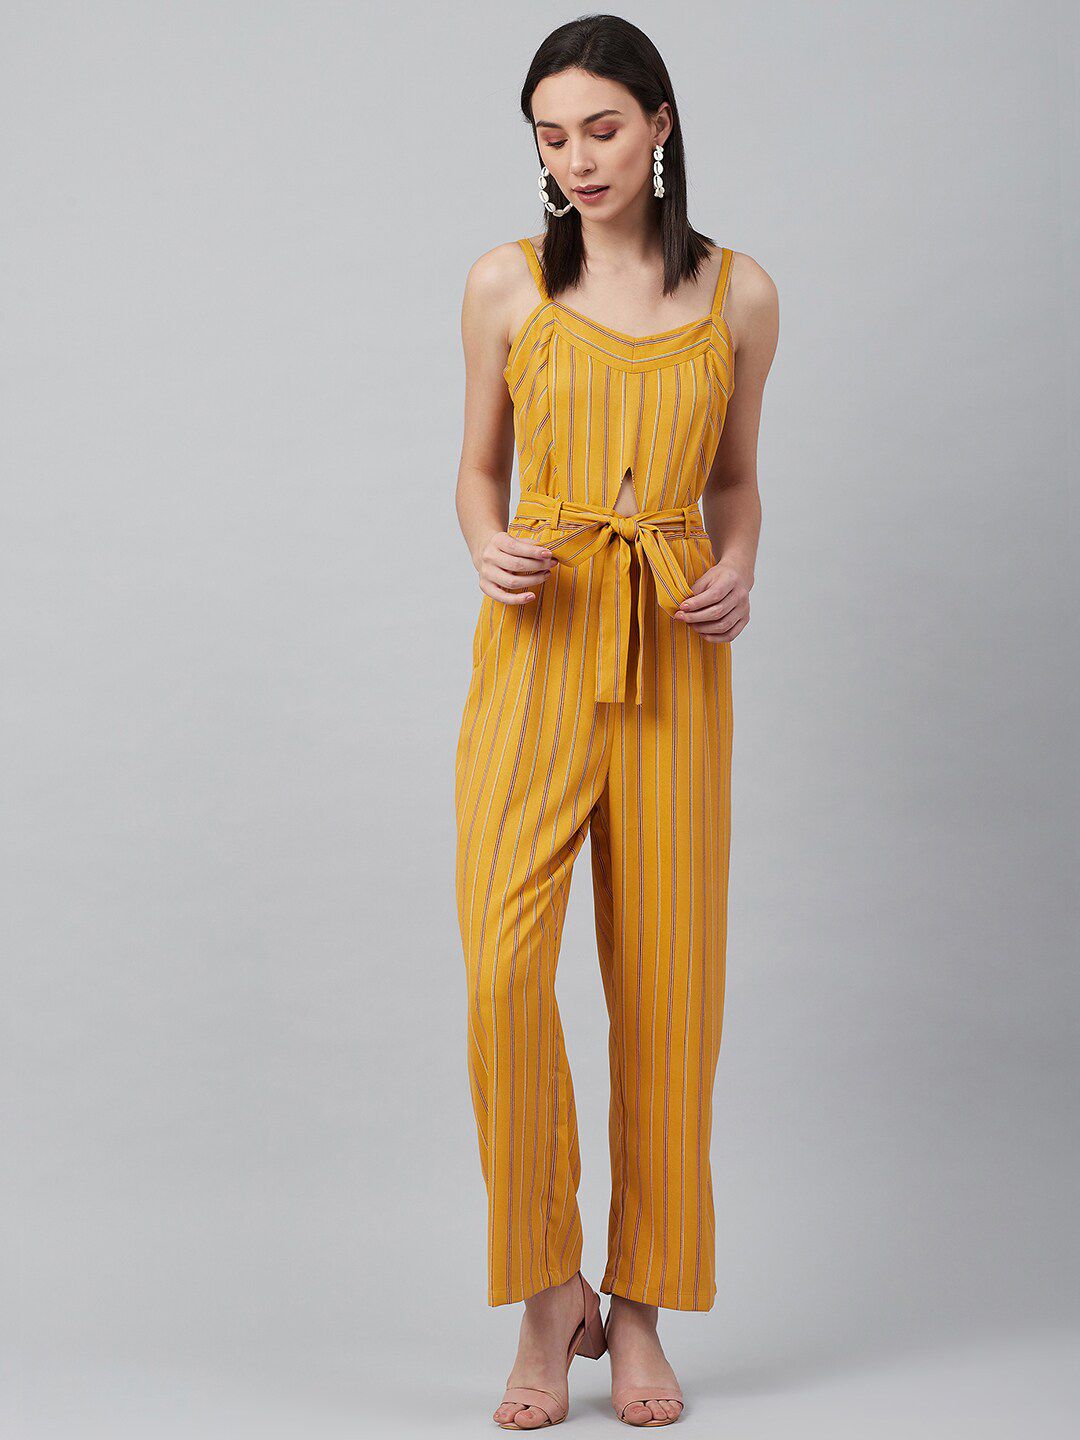 Marie Claire Women Mustard & Maroon Striped Basic Jumpsuit Price in India